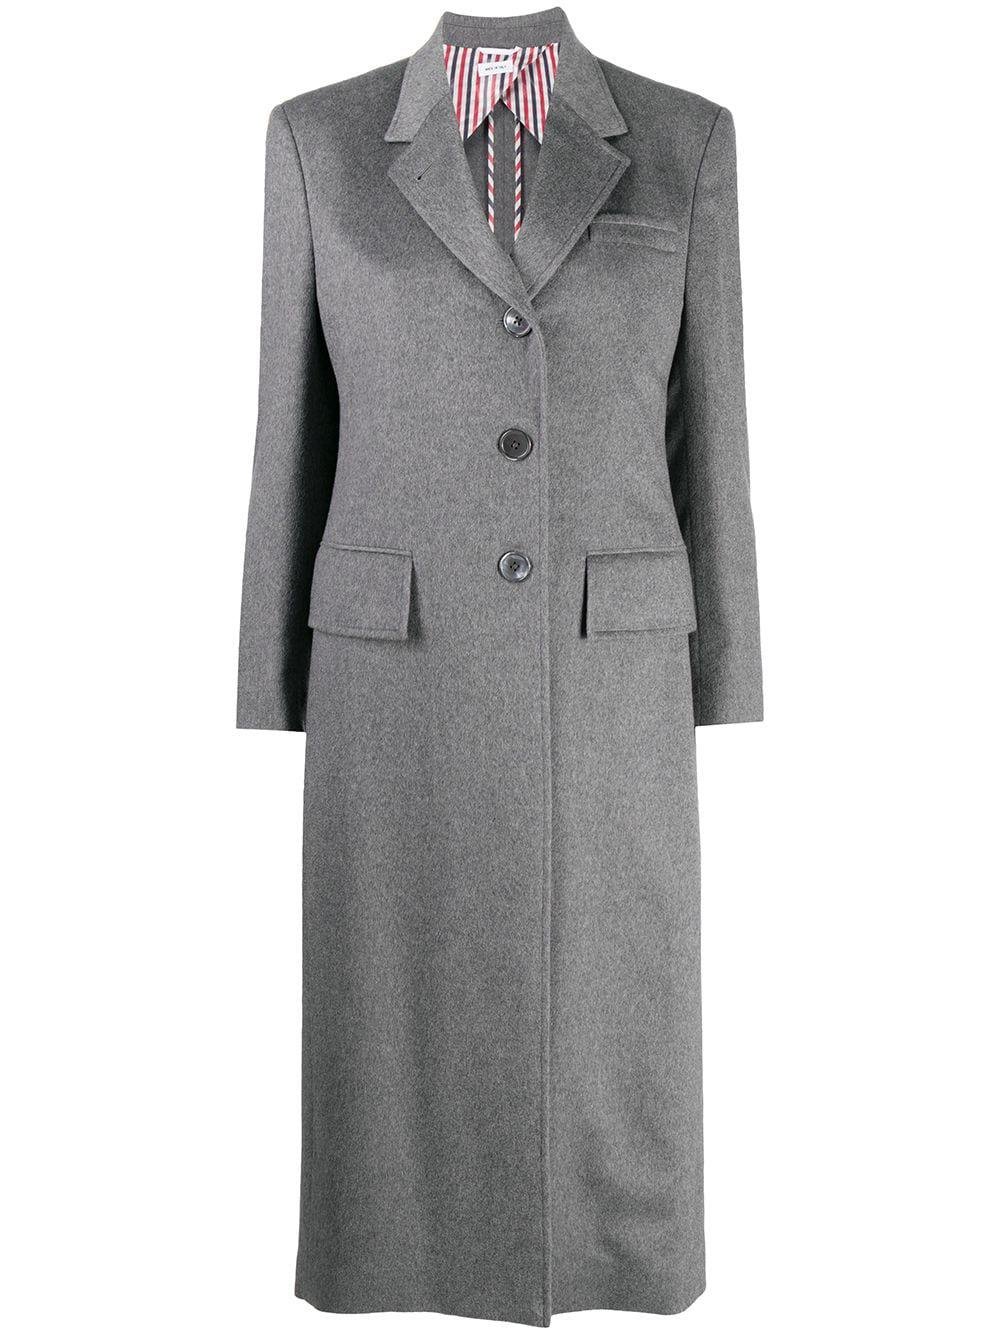 wide lapel cashmere overcoat by THOM BROWNE